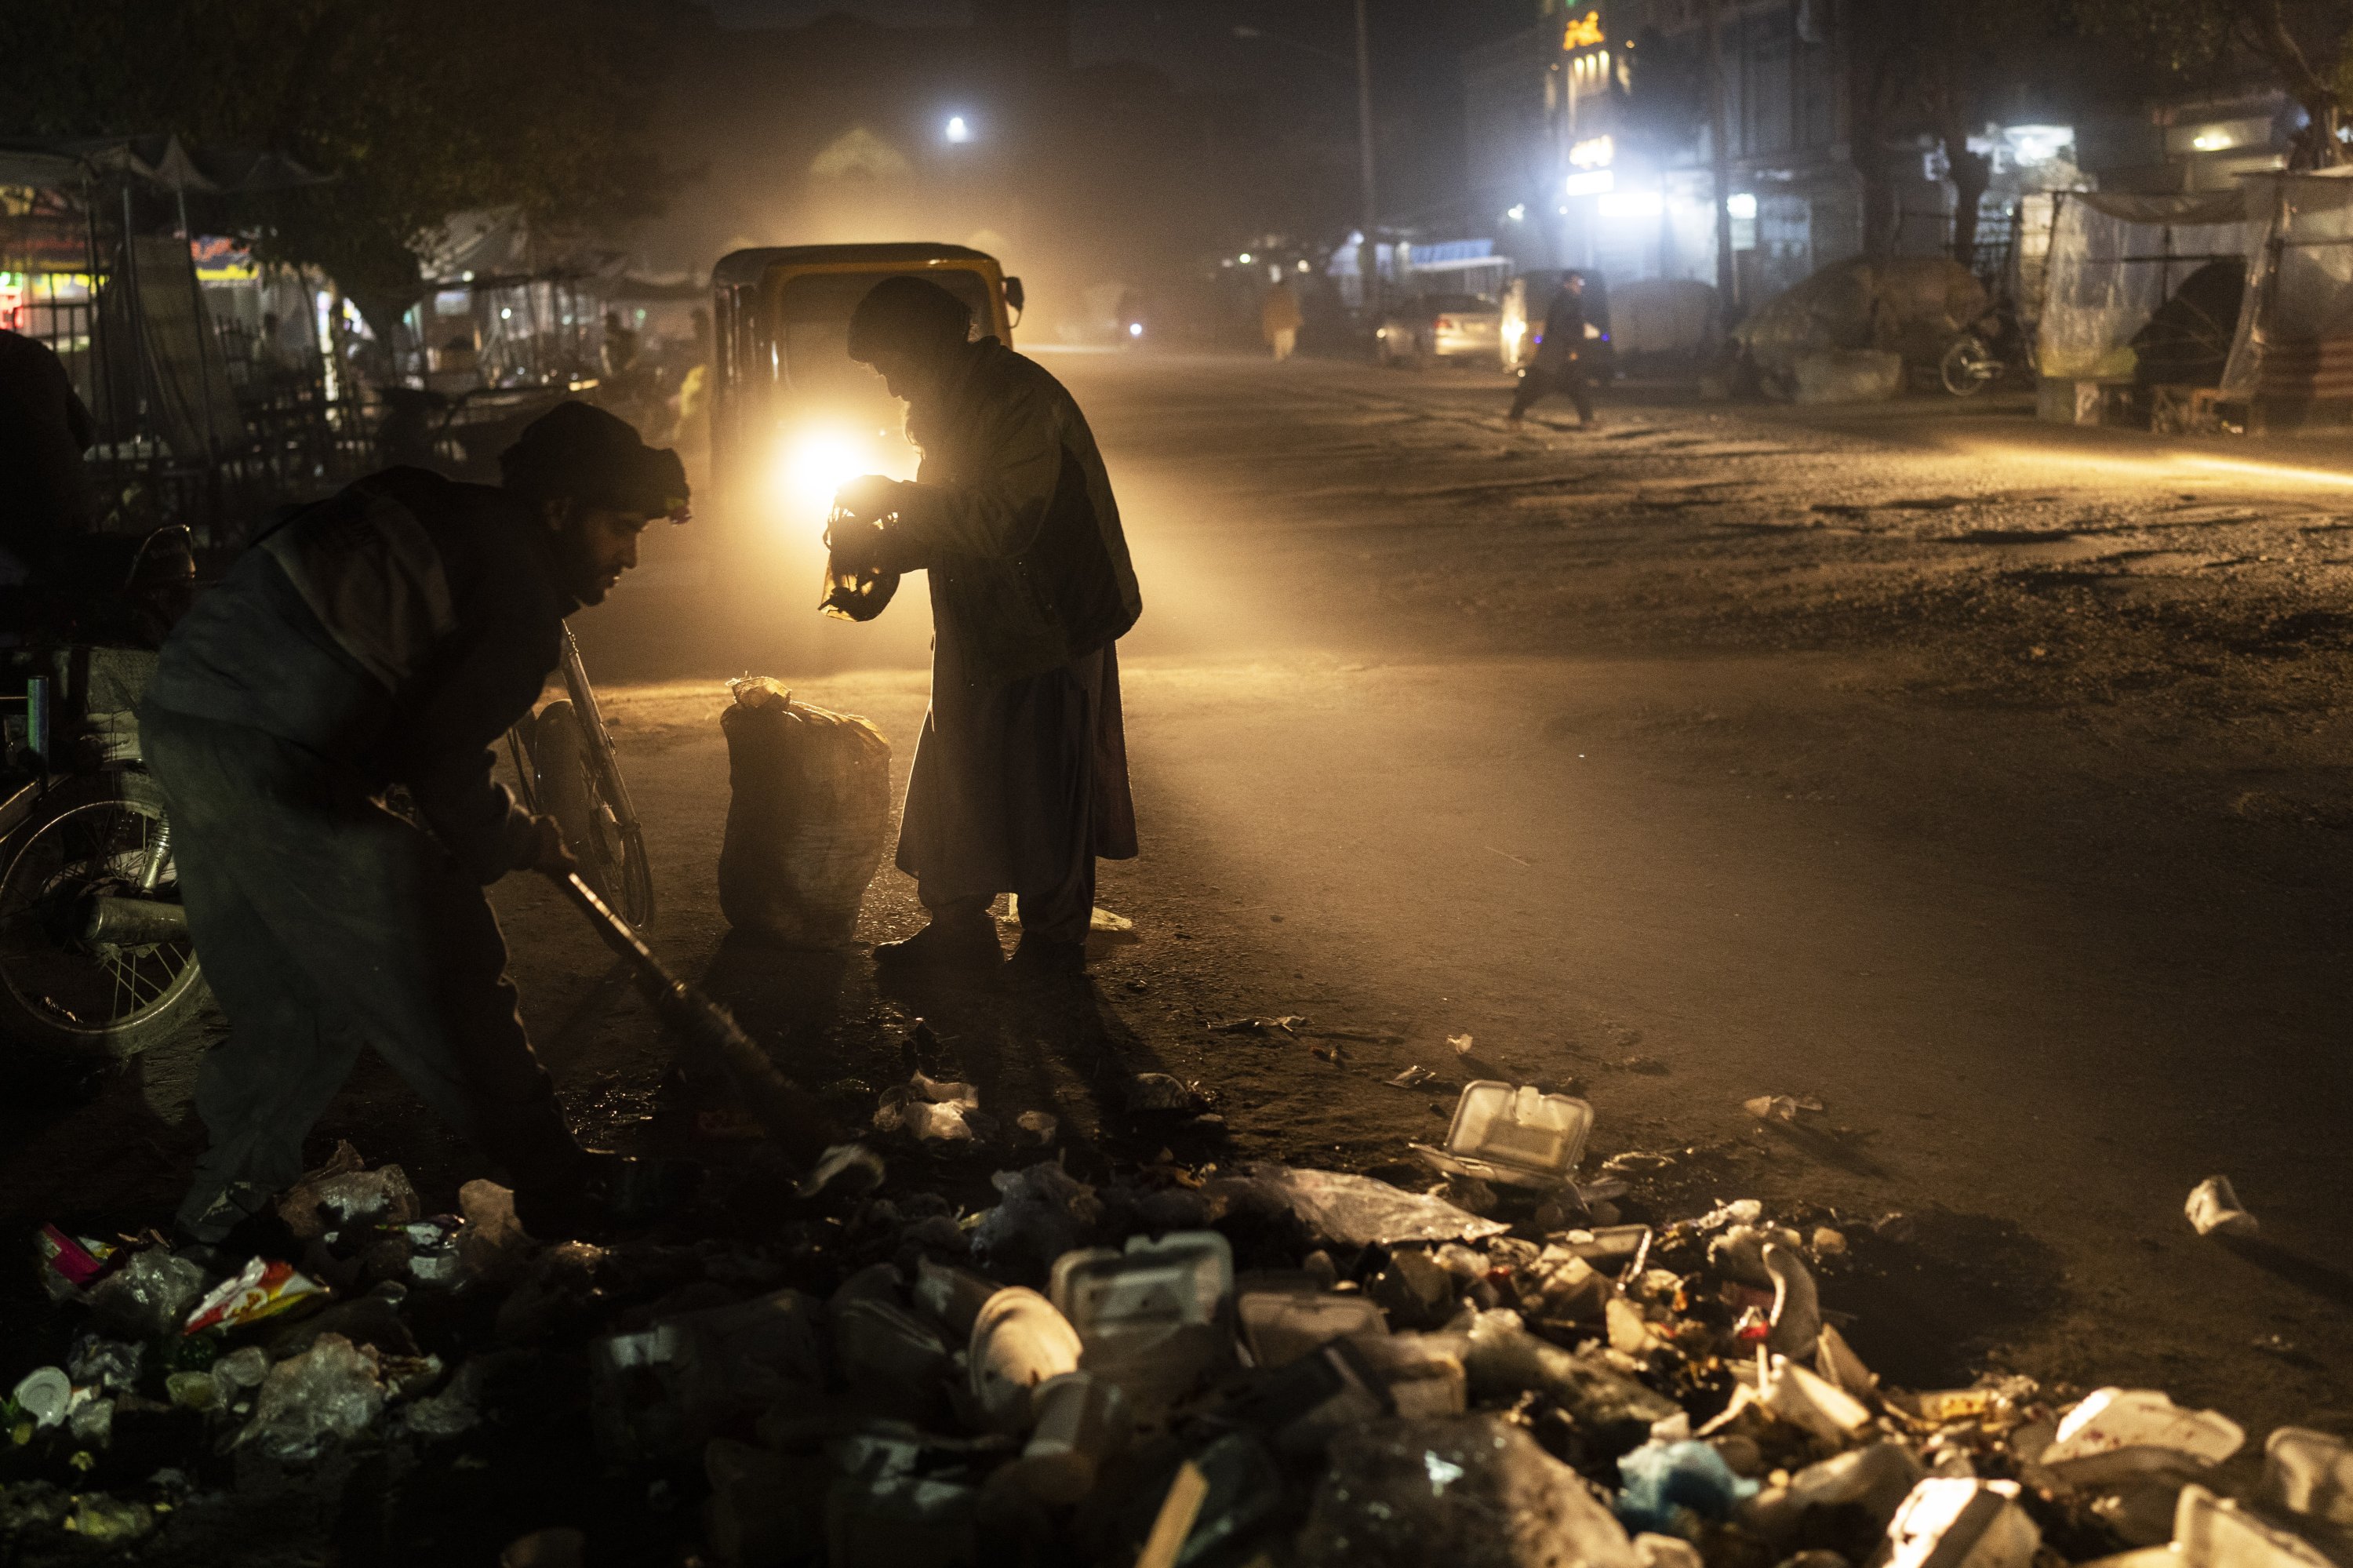 An Afghan man collects scraps of alluminium and plastic, in Herat, Afghanistan, Nov. 22, 2021. (AP Photo)